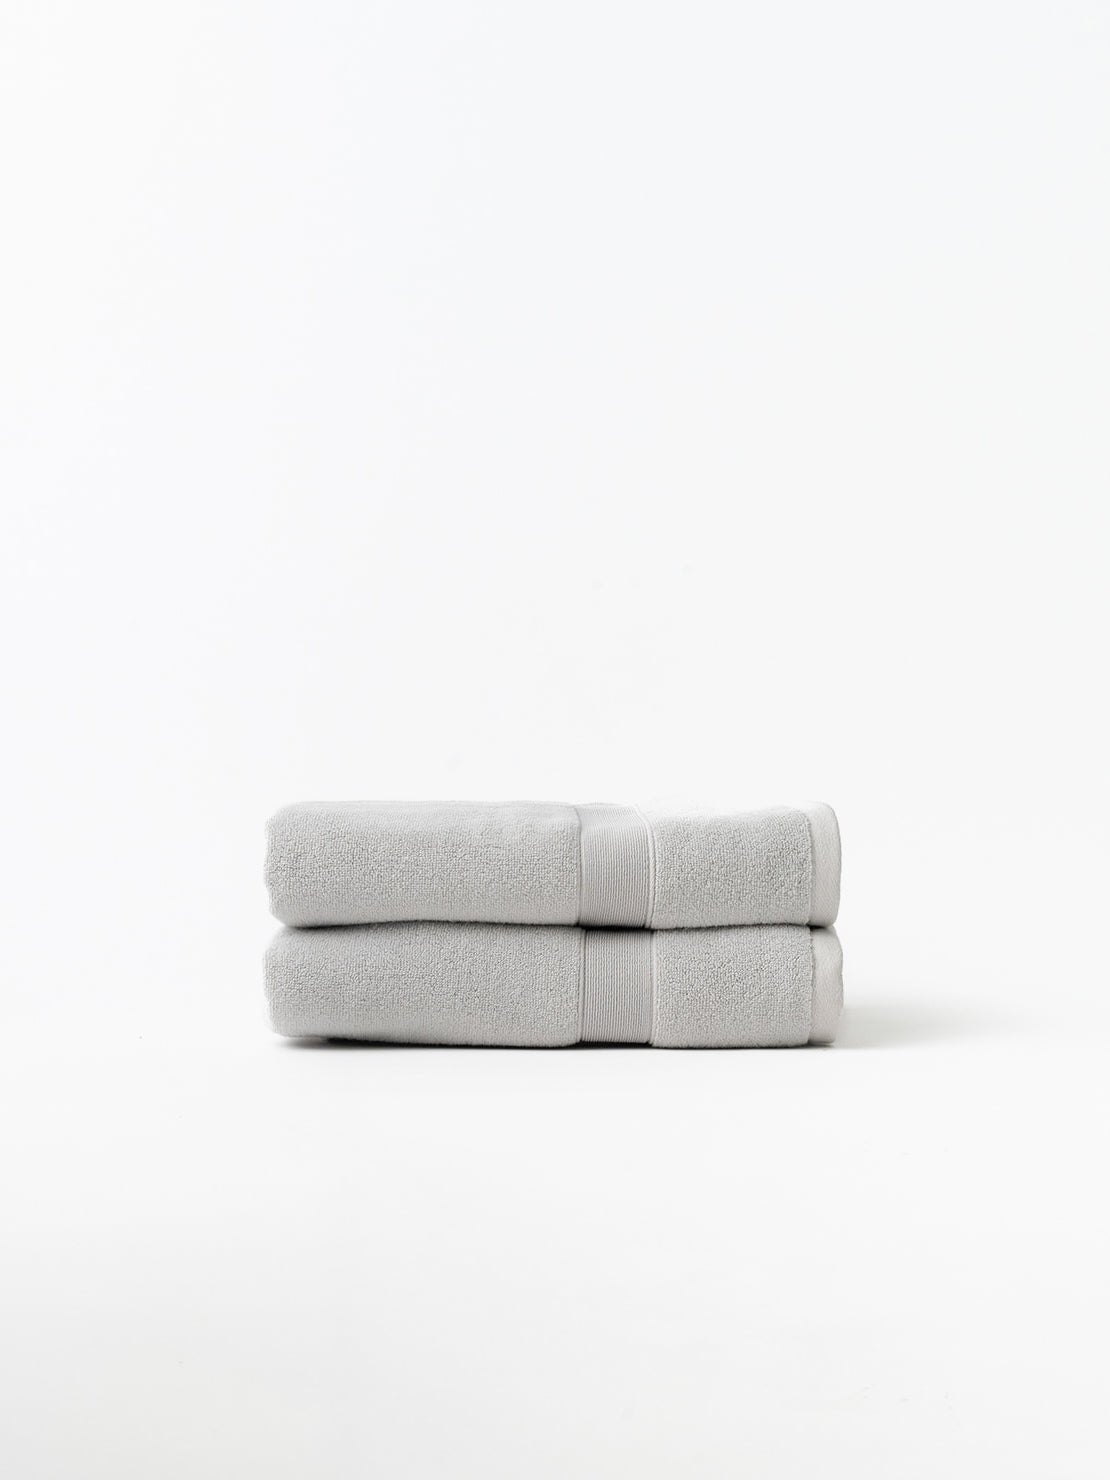 Light grey luxe bath towels folded with white background 